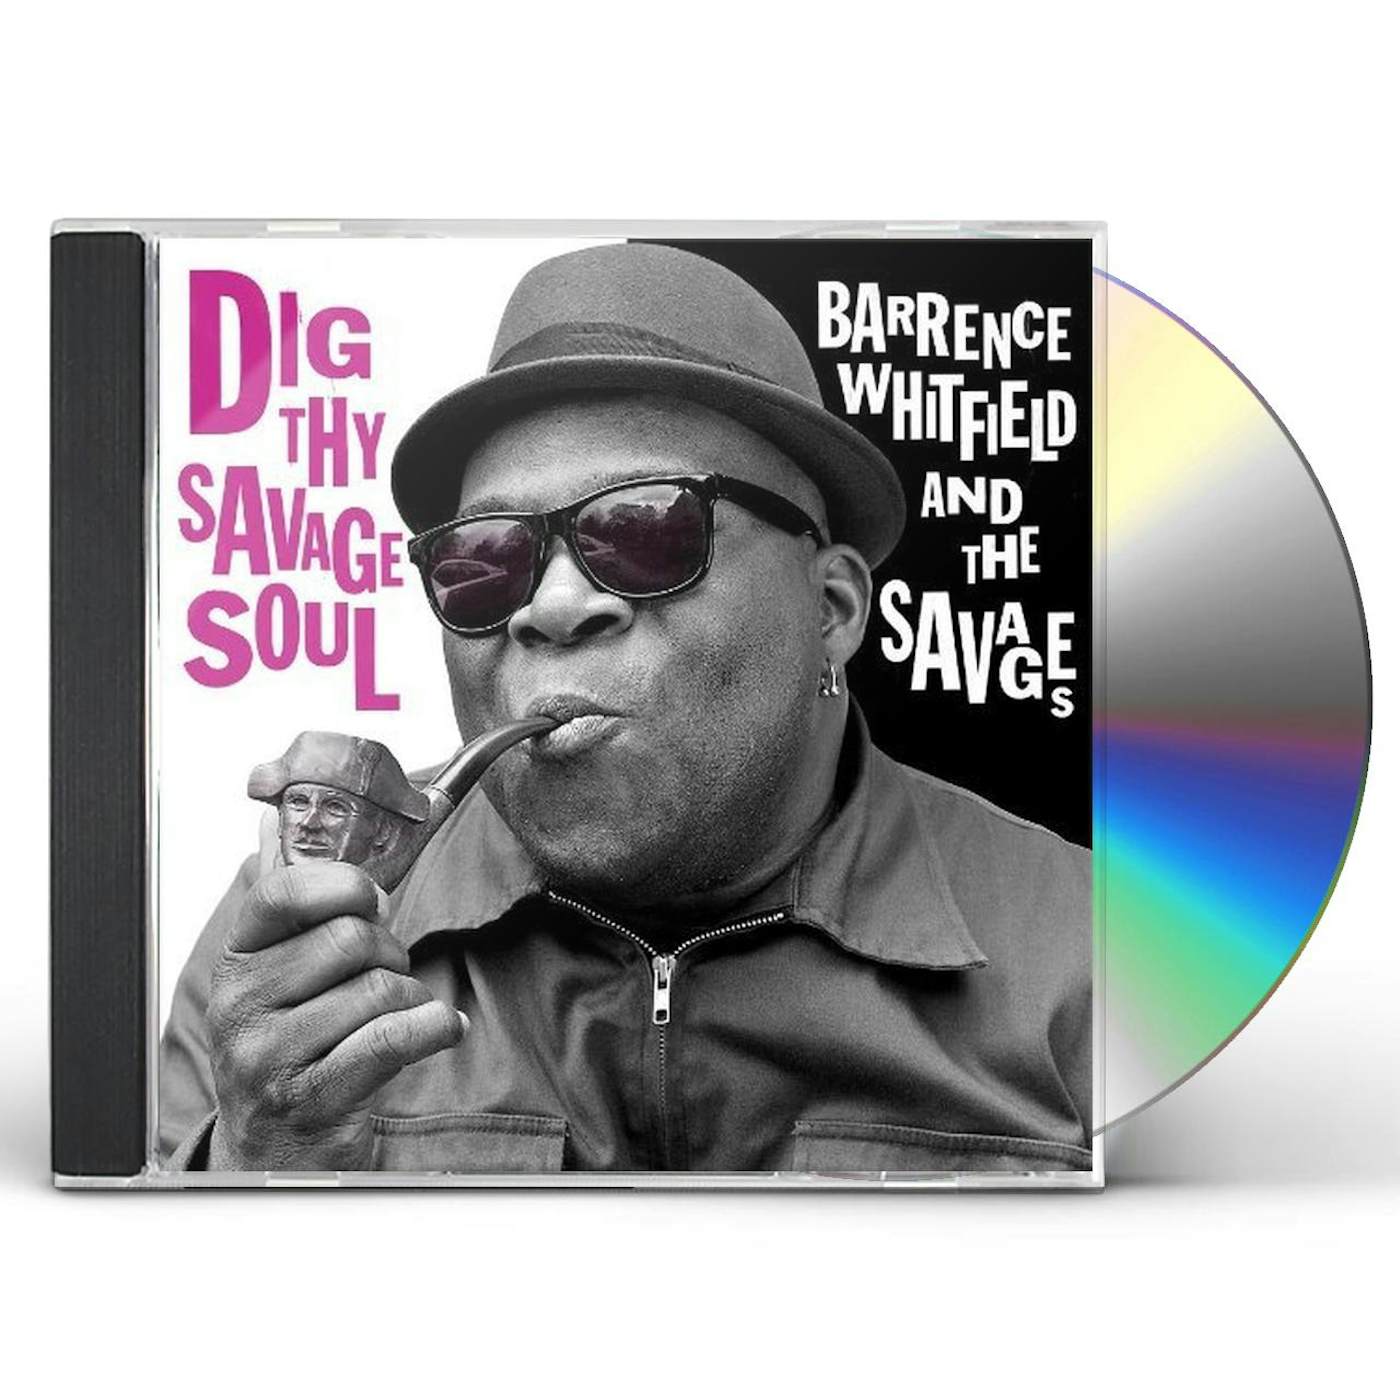 Barrence Whitfield & The Savages DIG THY SAVAGE SOUL CD